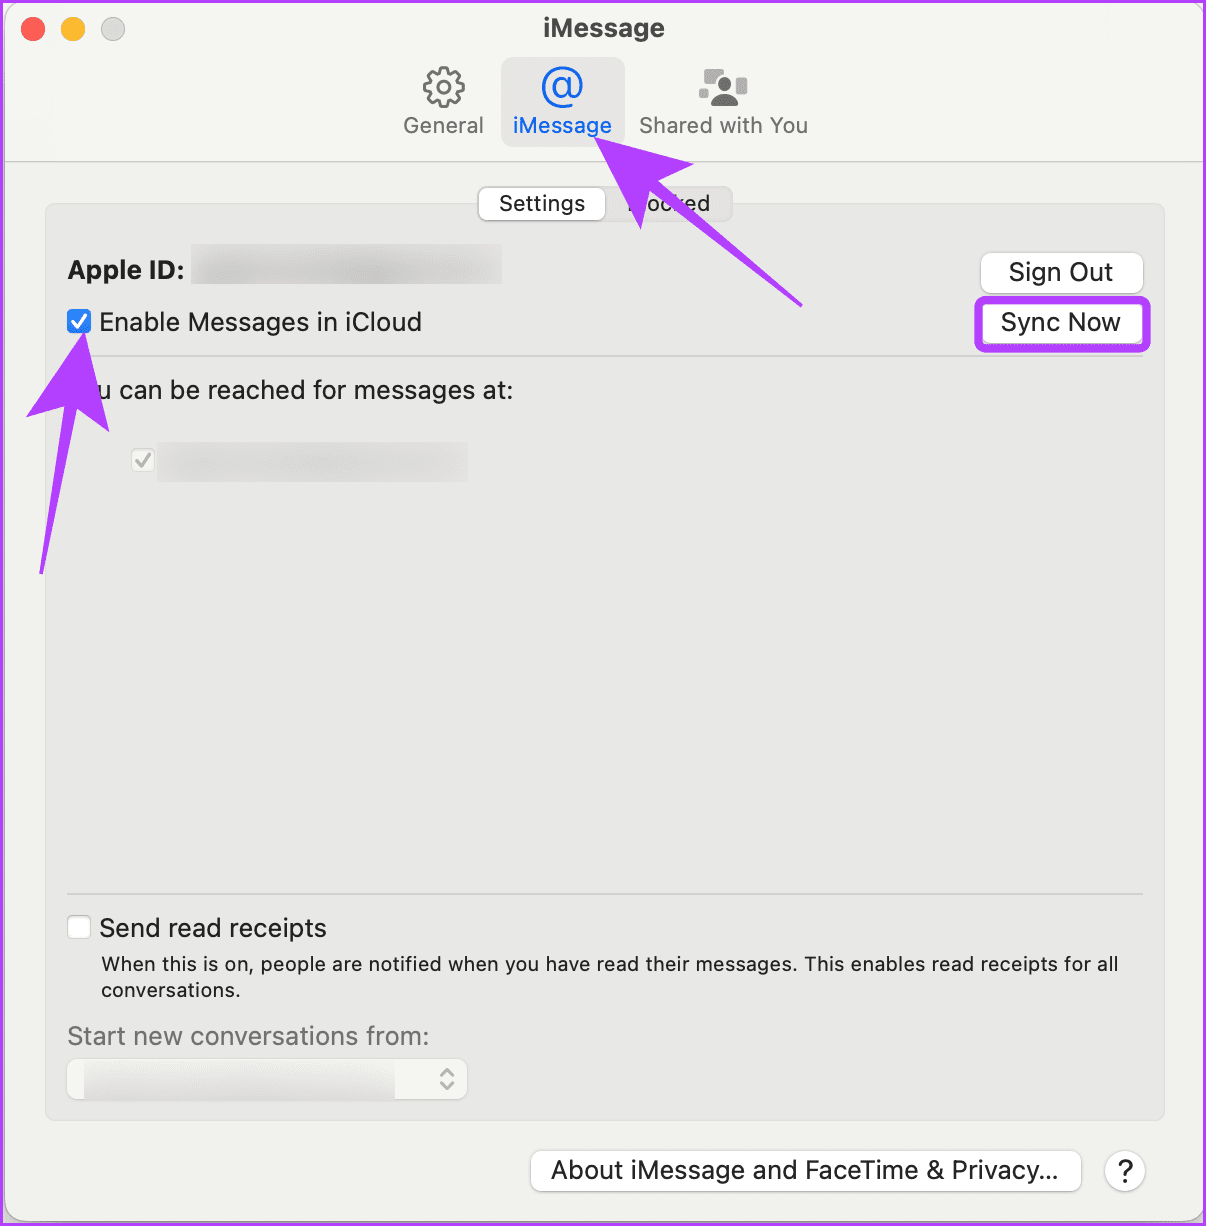 choose imessage and then enable messages in icloud and then hit Sync now